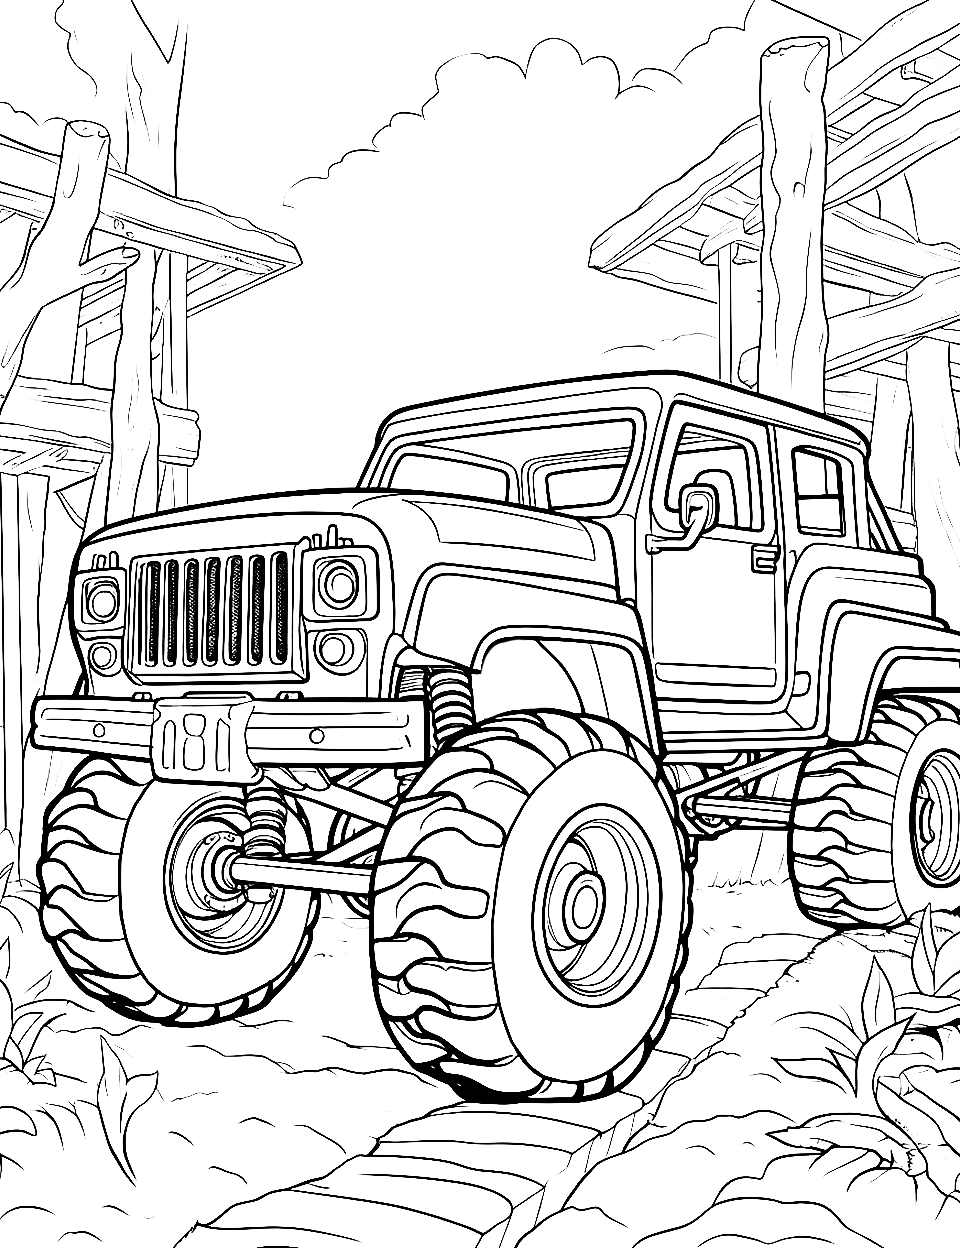 Park Cruise Monster Truck Coloring Page - A monster truck navigating through a park.